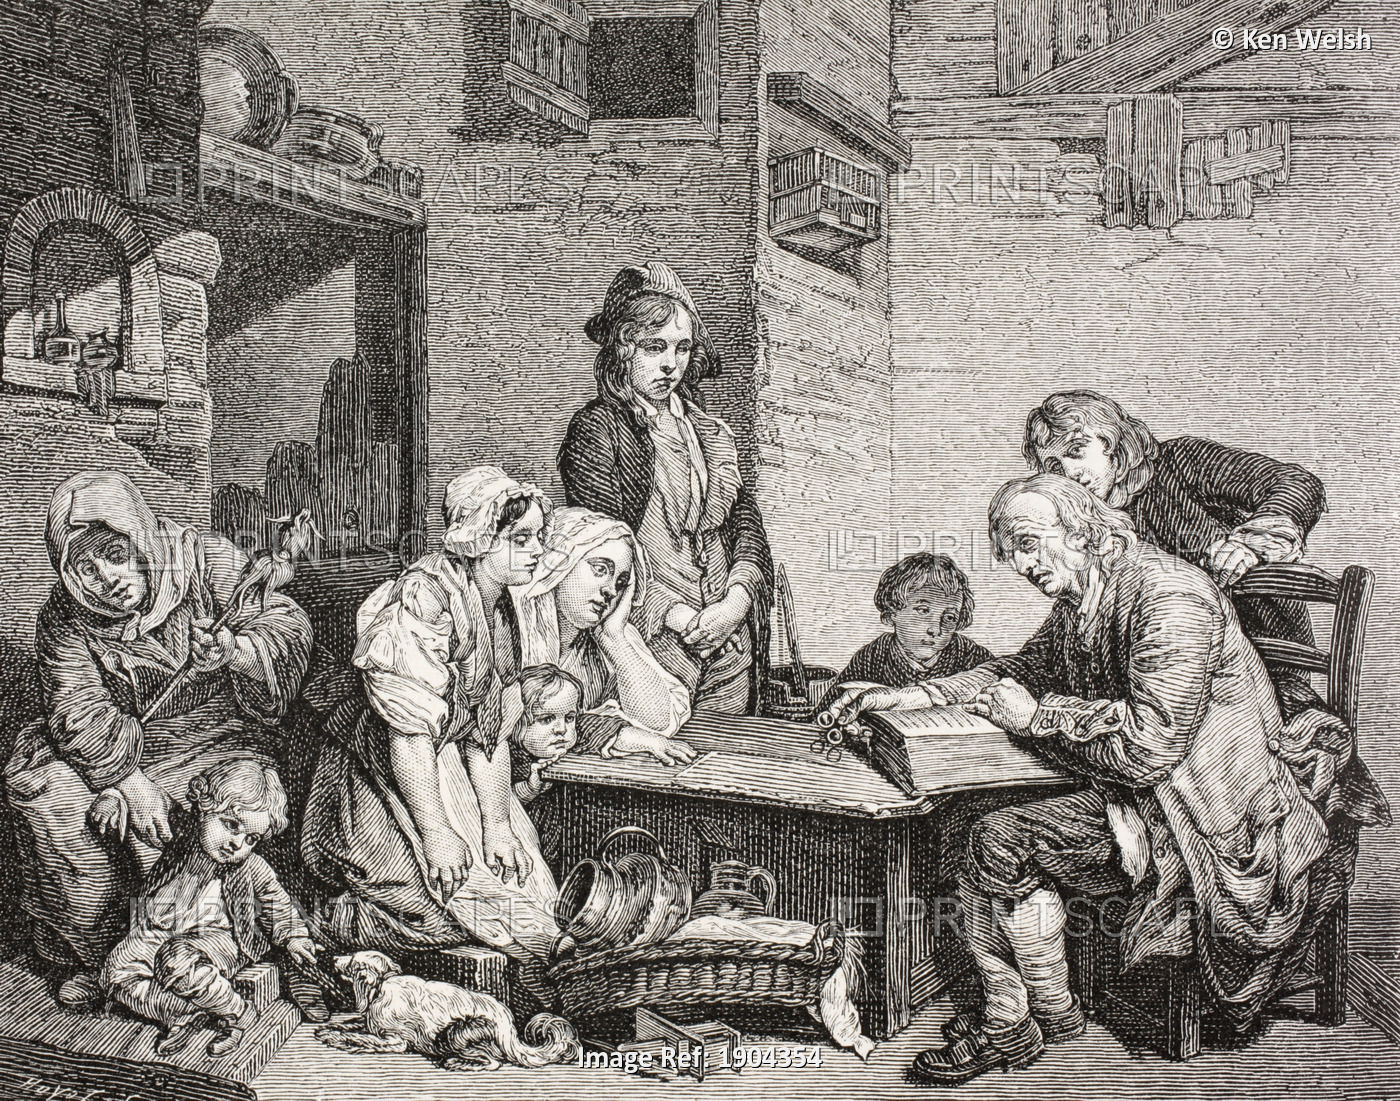 A Poor Family Gathers Around As The Father Reads From The Bible. After A Work ...